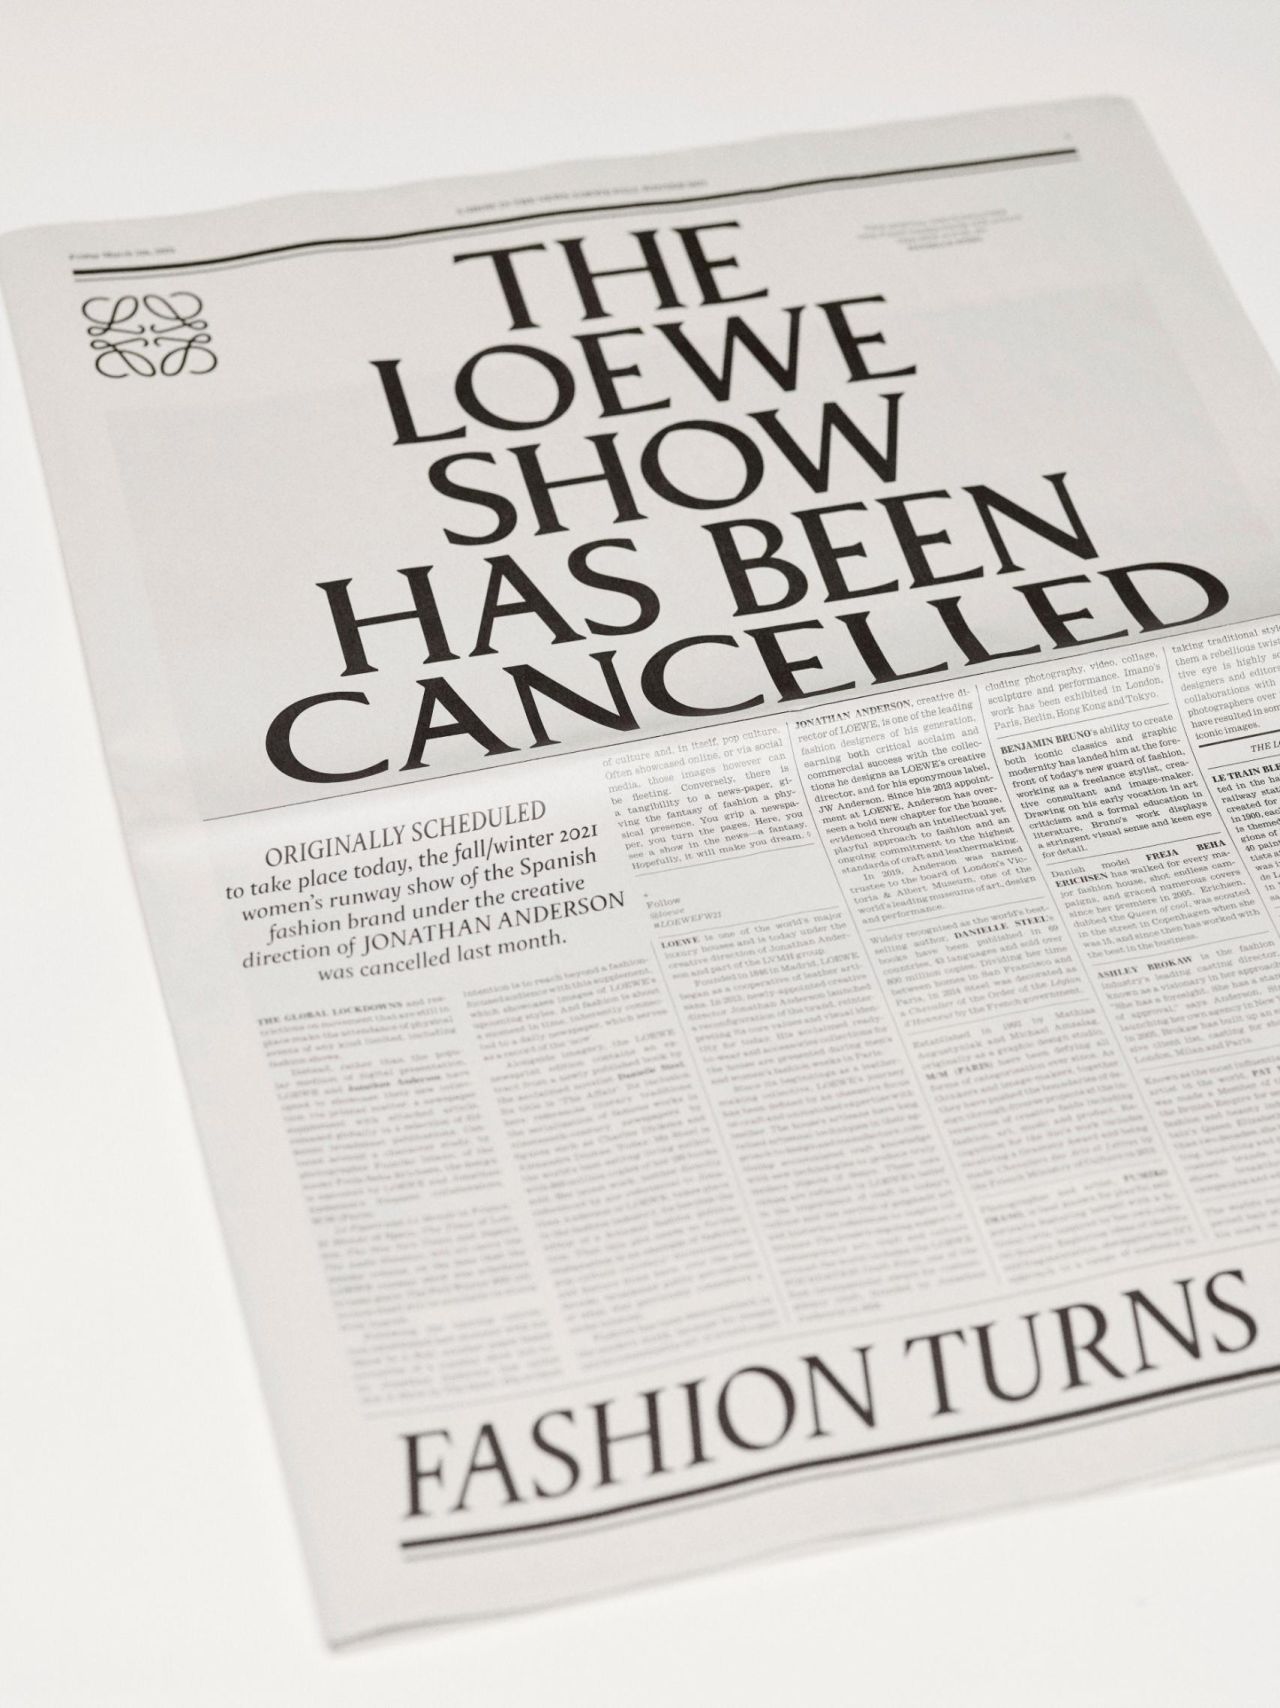 On the day of its scheduled show, Loewe released a newspaper-style promotional, leading with a story announcing "The Loewe show has been cancelled." The pages, filled with collection imagery, were inserted as supplements into national papers around the world 